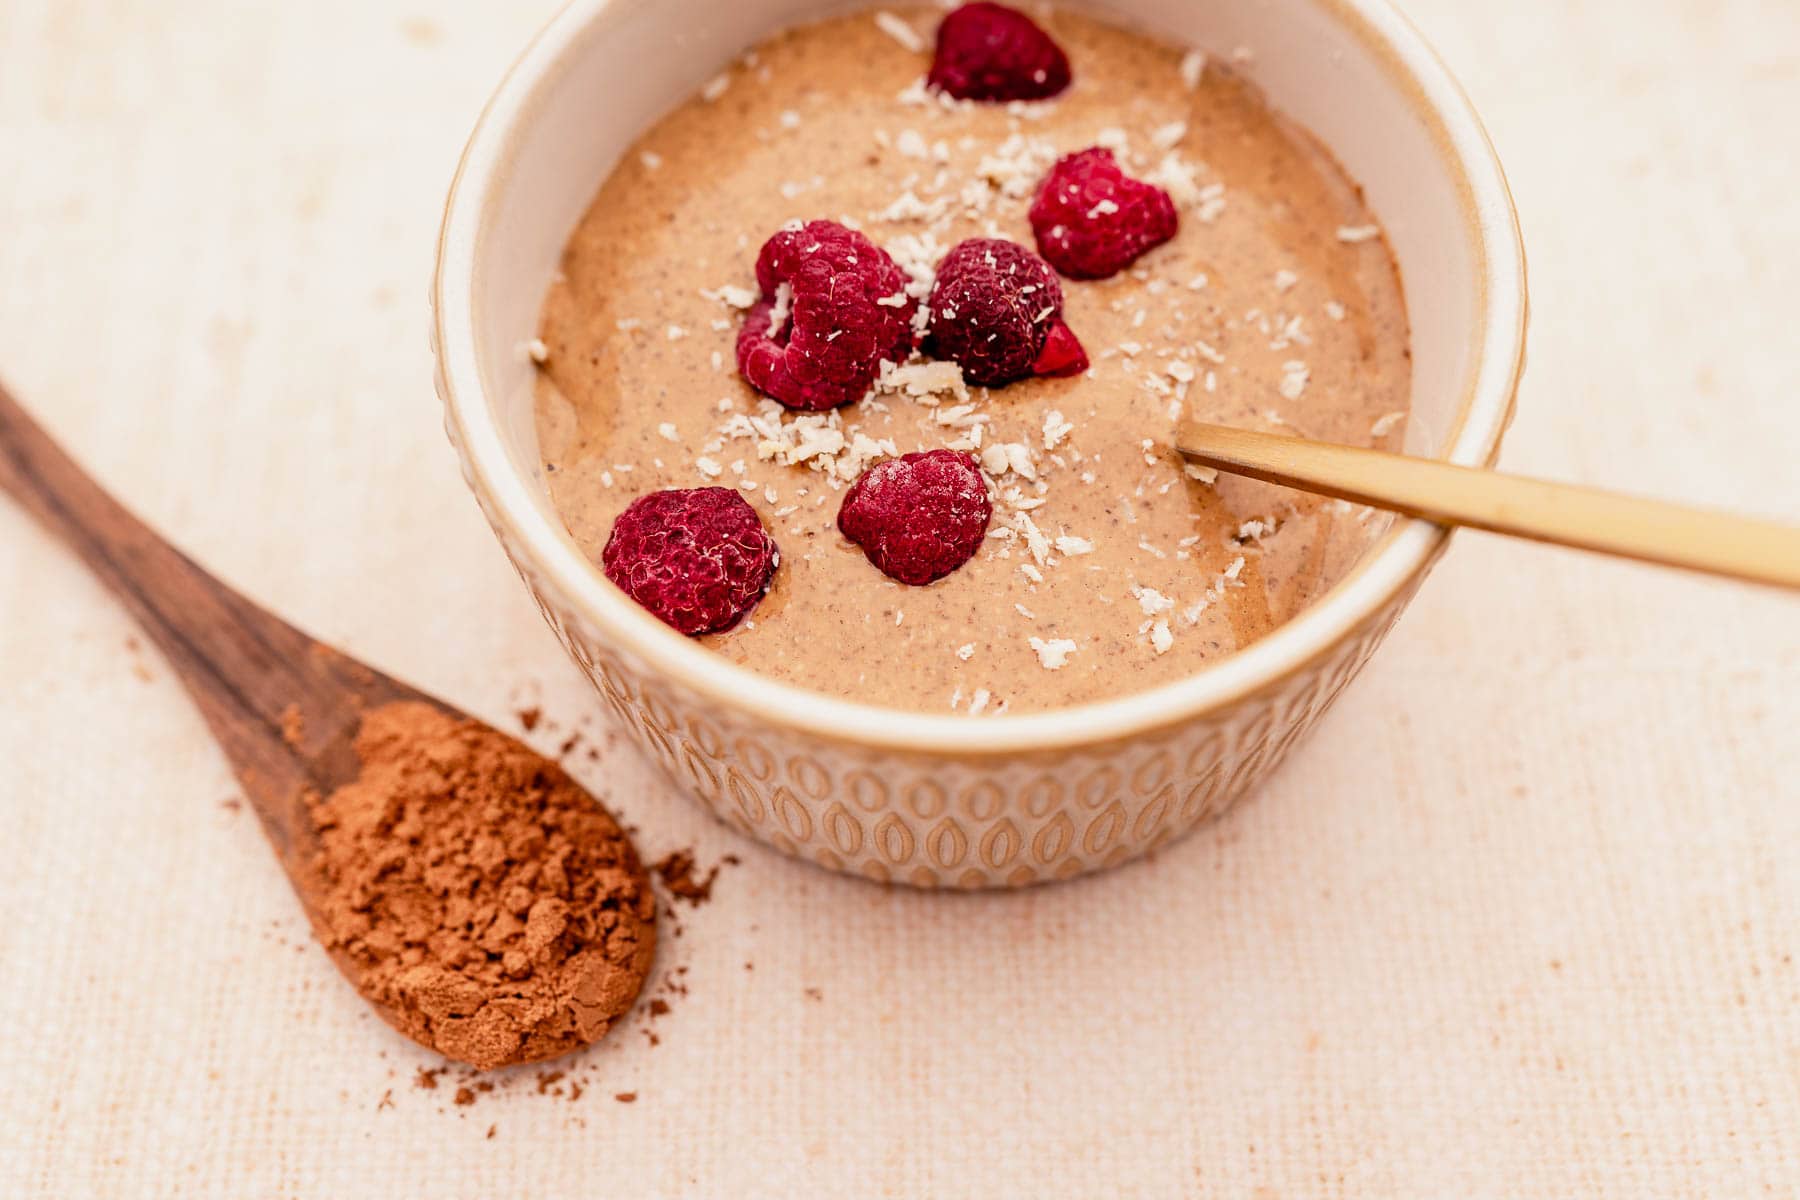 A cup of blended chocolate chia pudding topped with raspberries and accompanied by a wooden spoon.